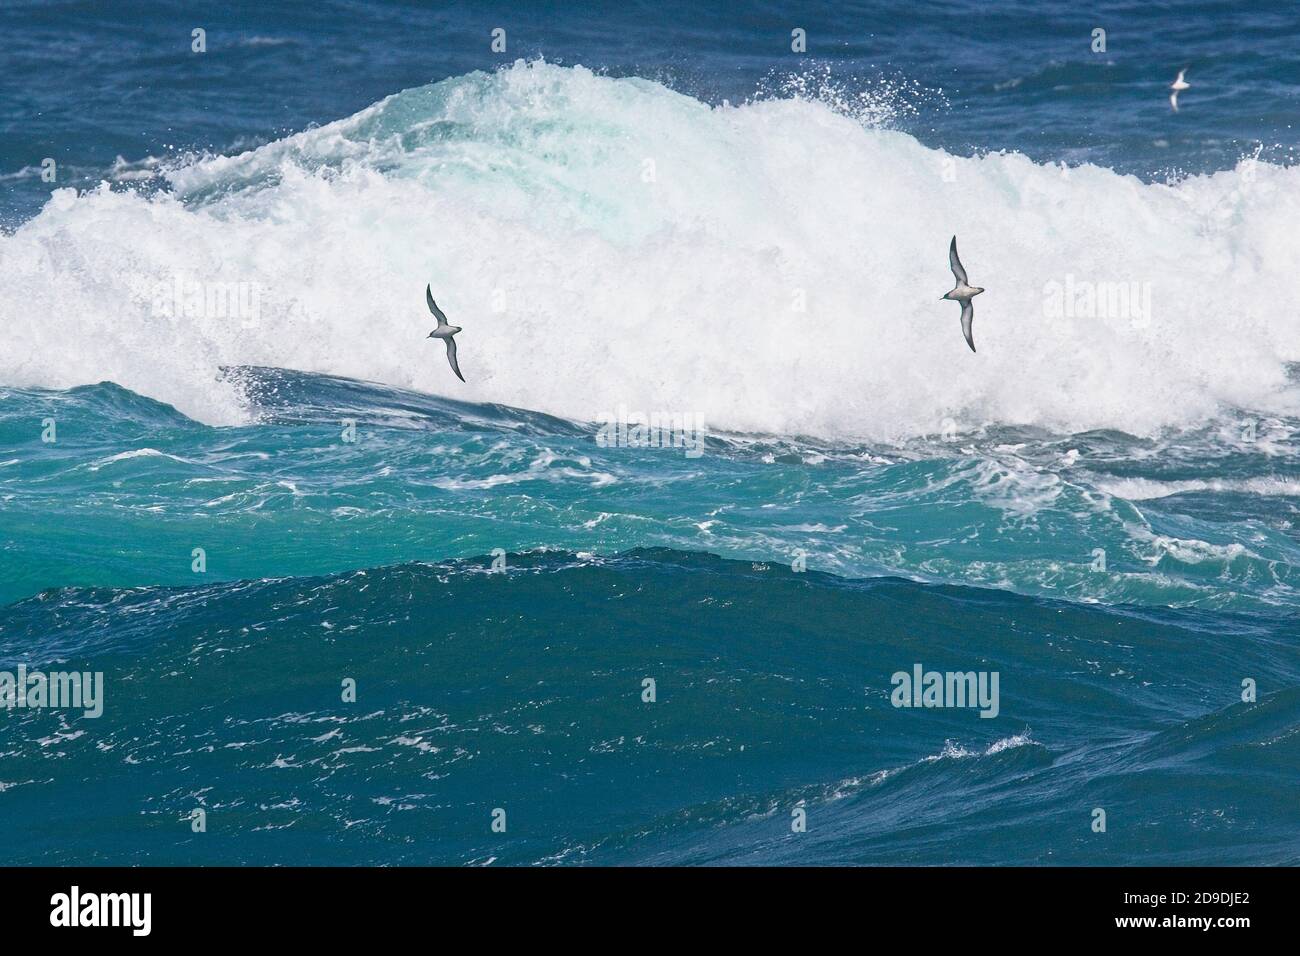 Two Manx Shearwaters (Puffinus puffinus) in flight over a rough sea off Pendeen, Cornwall, England, UK. Stock Photo